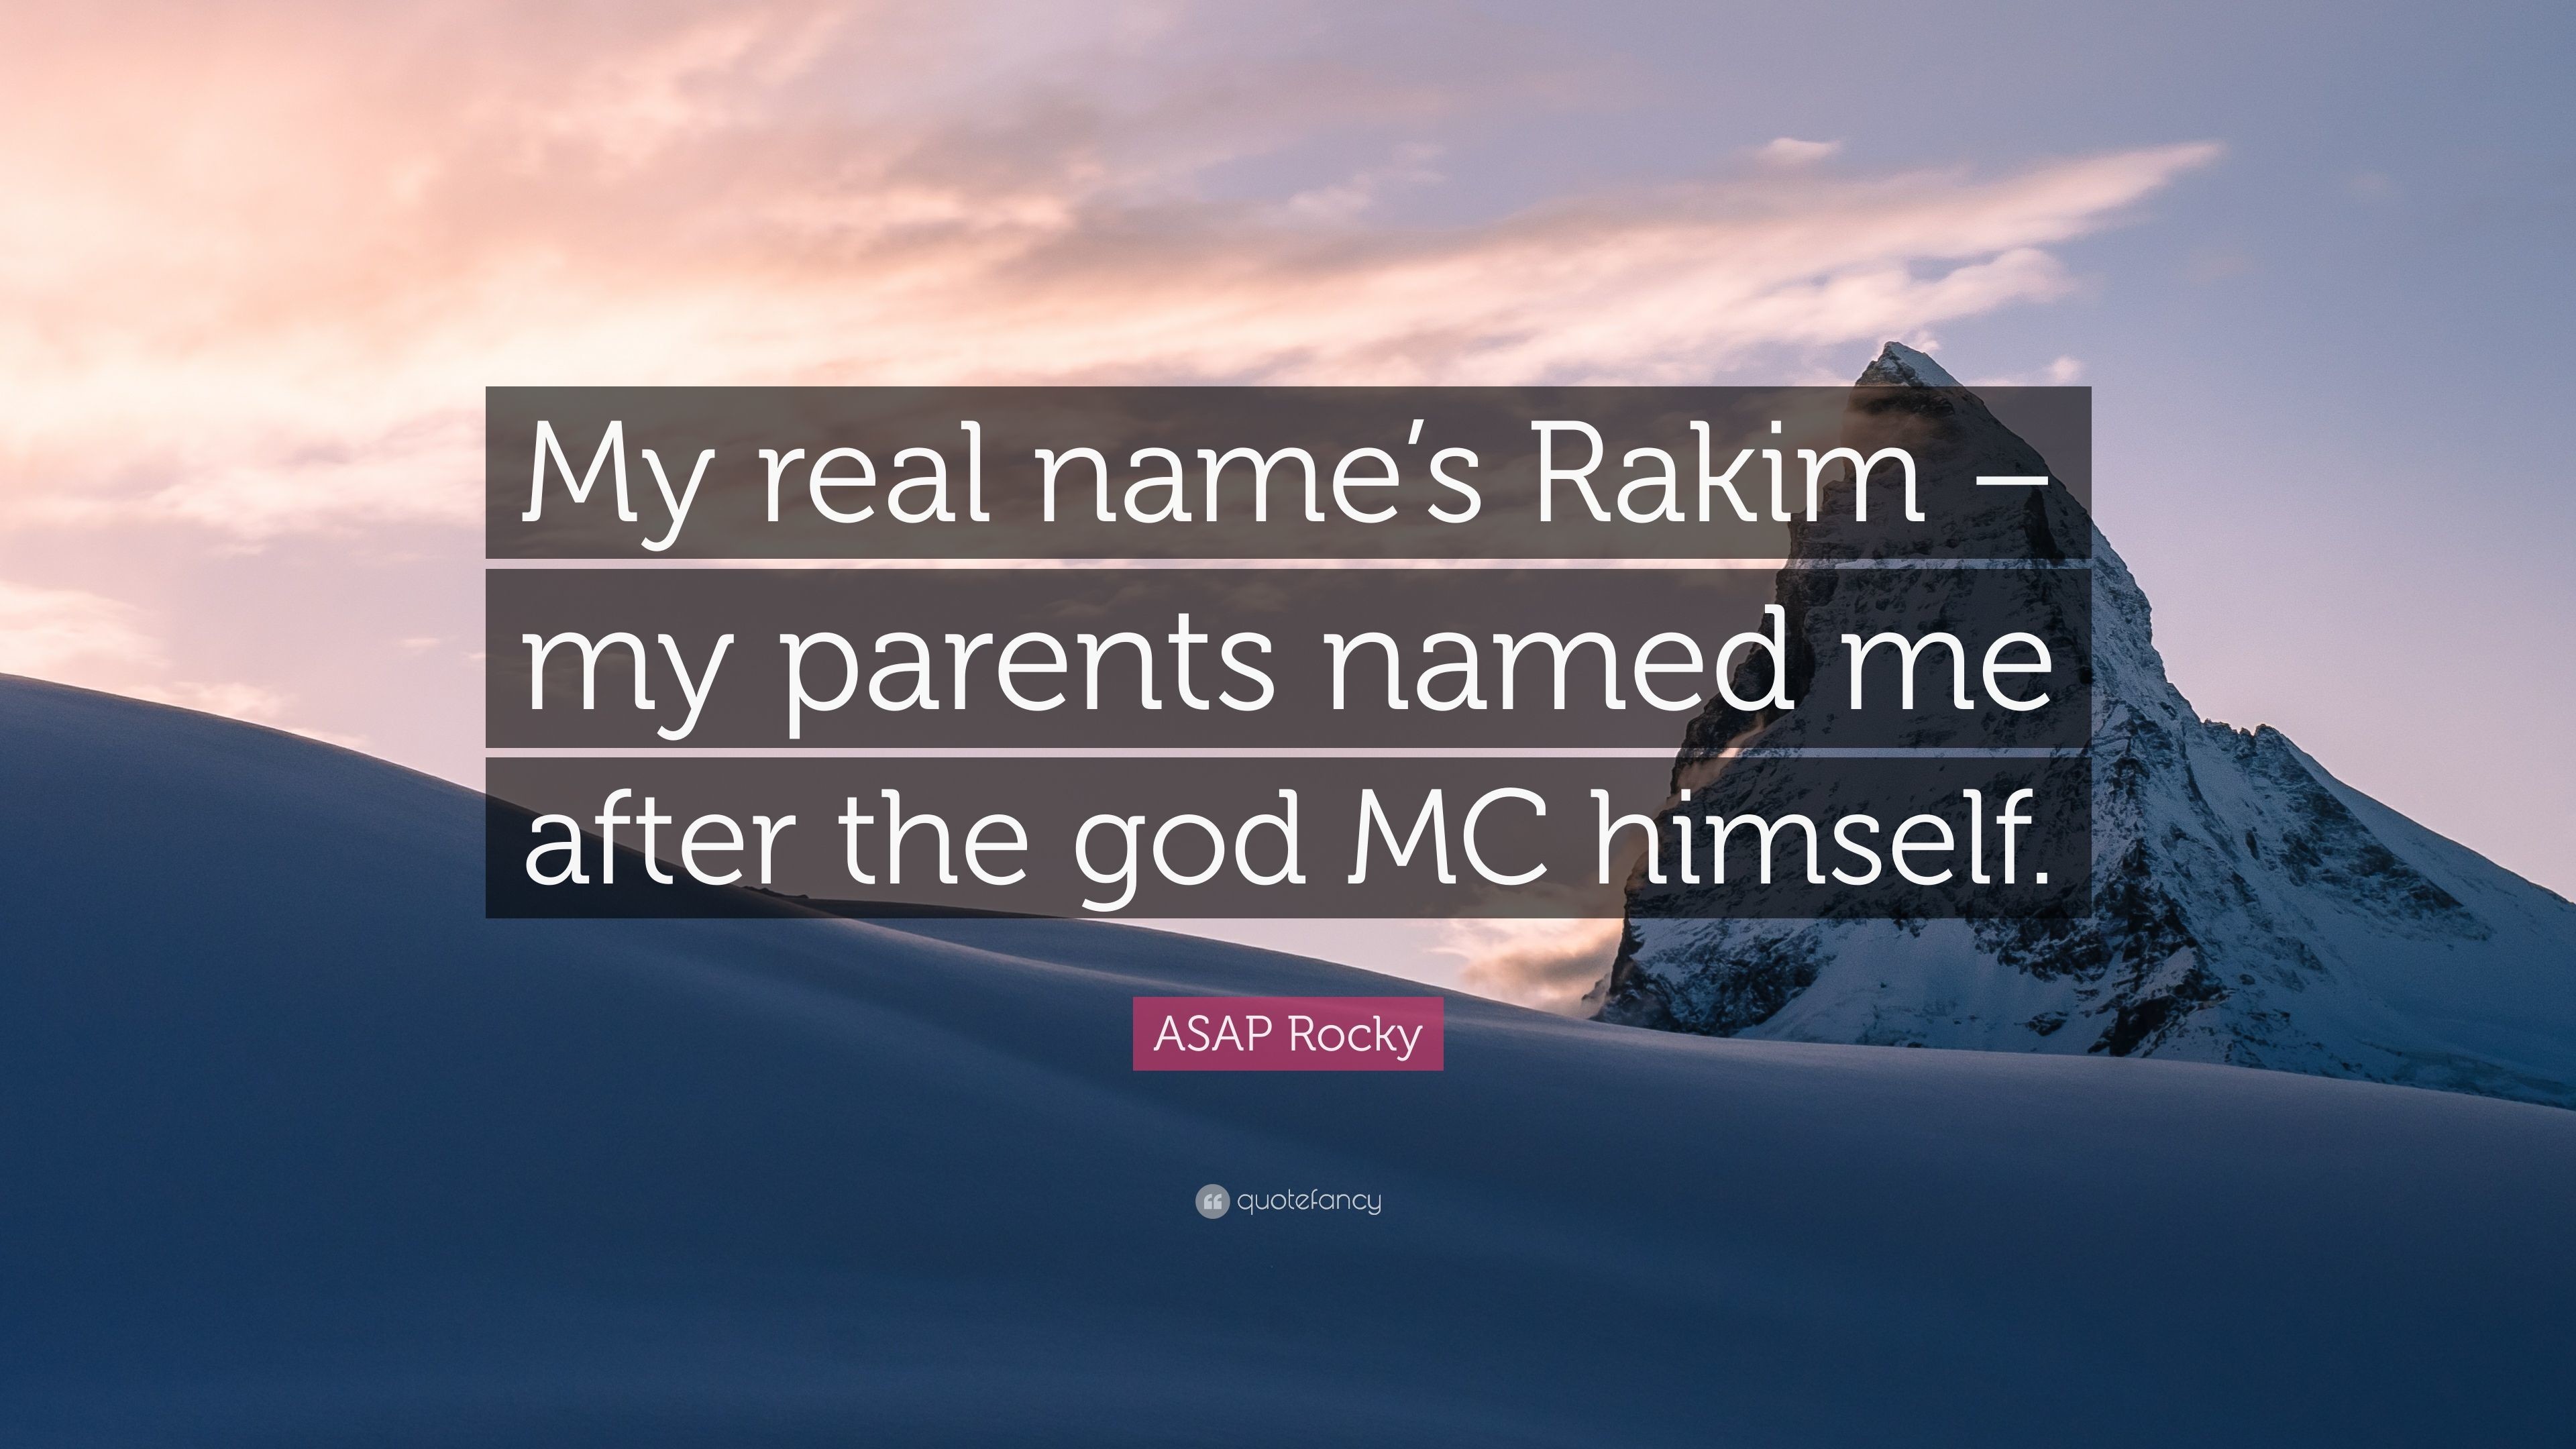 3840x2160 ASAP Rocky Quote: “My real name's Rakim – my parents named me after the